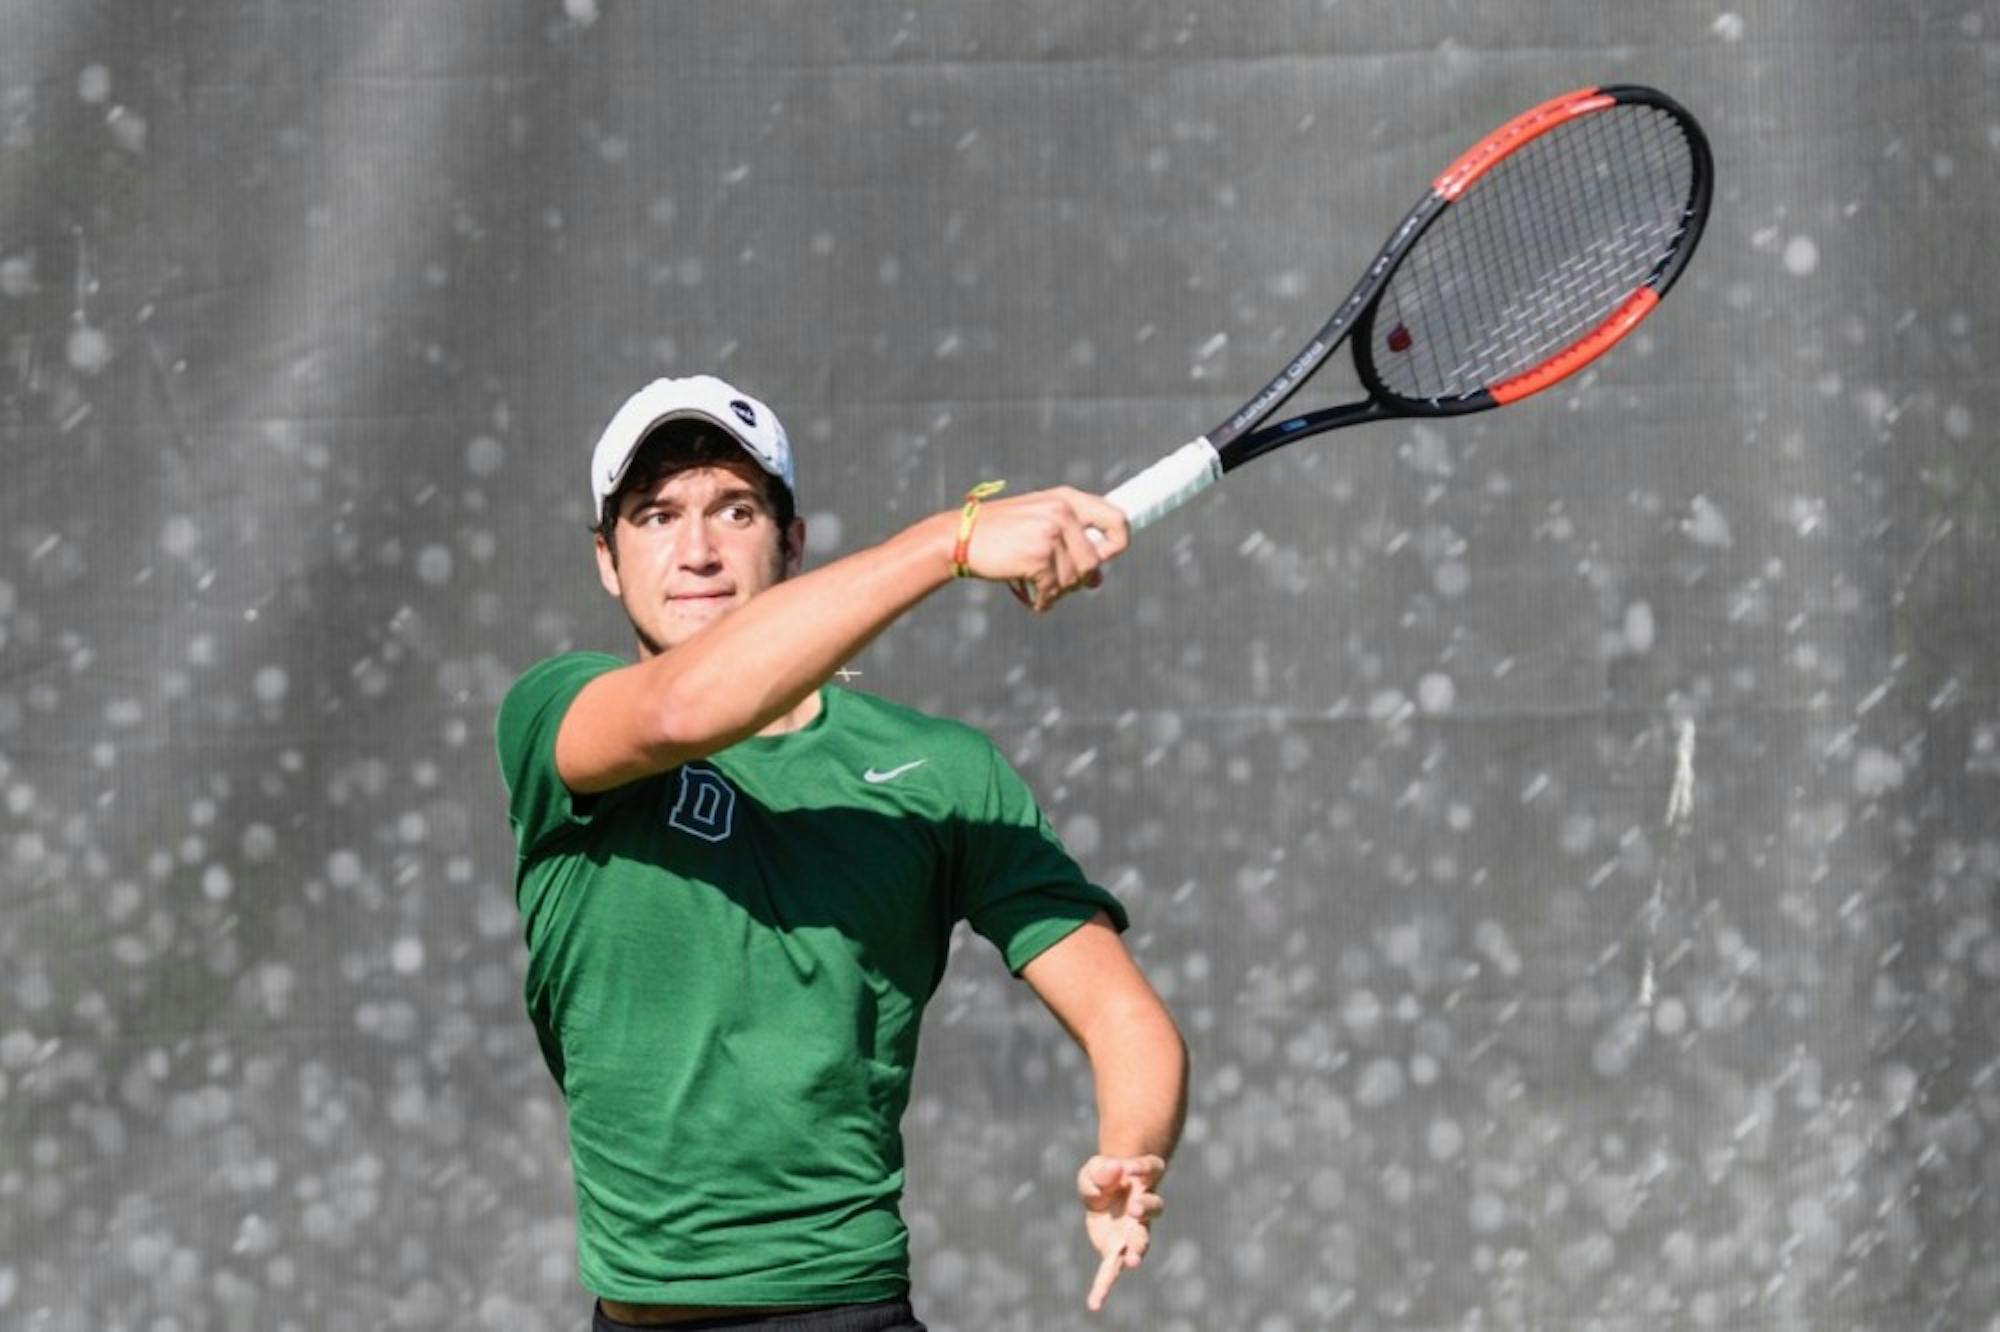 Dan Martin ’21 from Laval, Québec is currently playing at No. 2 singles for the Big Green.